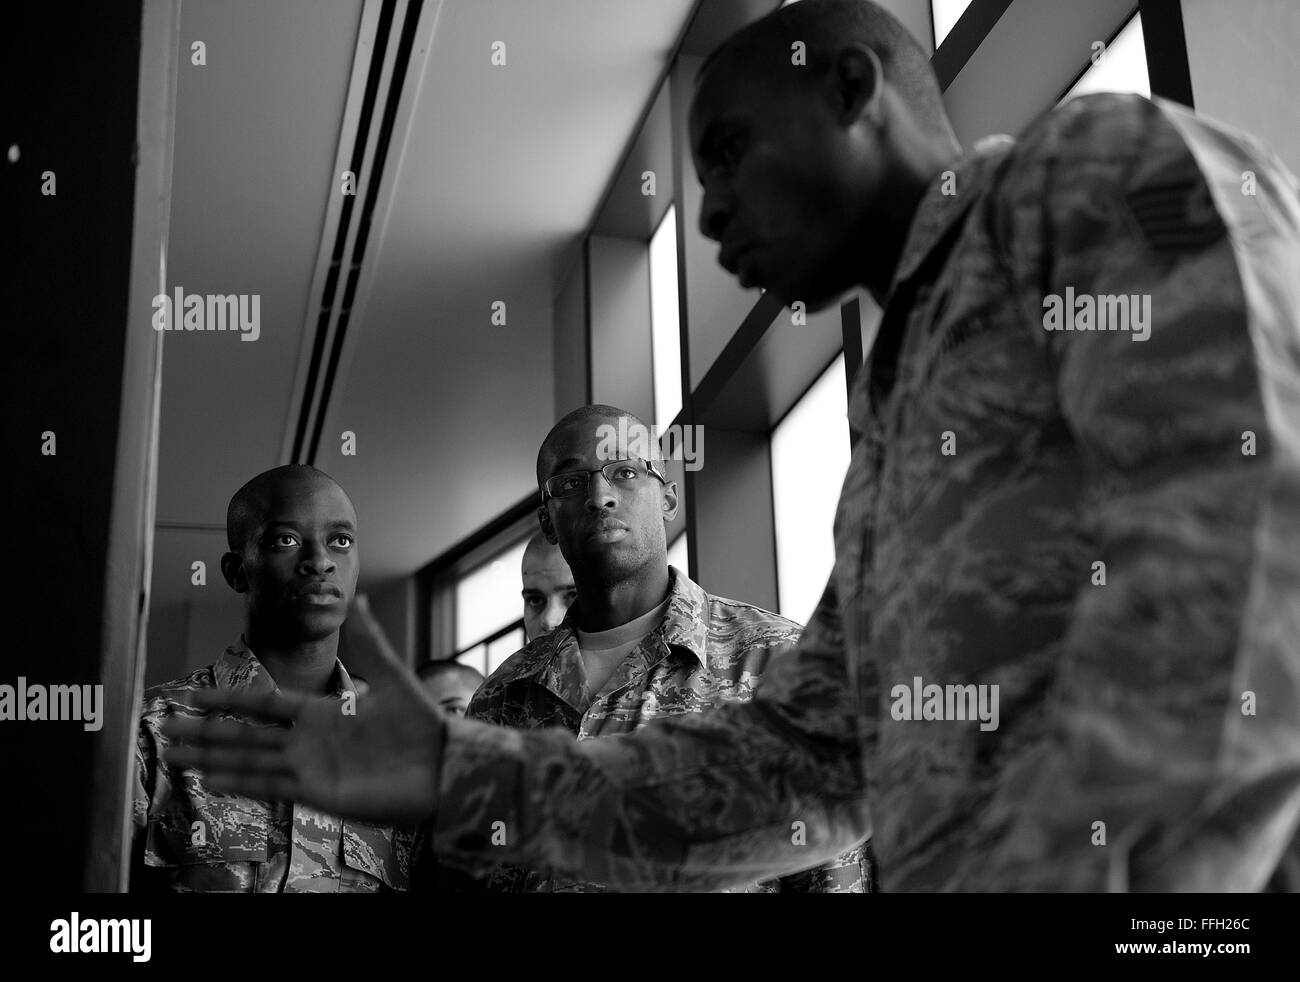 323rd Training Squadron, military training instructor, Tech. Sgt. Chananyah Stuart, explains the dorm cleaning procedures to Airmen, Sidney Player and Justin Parker at Joint Base San Antonio-Lackland, Texas. Perfection is demanded of the trainees during the eight weeks of training though it is rarely achieved. Stock Photo